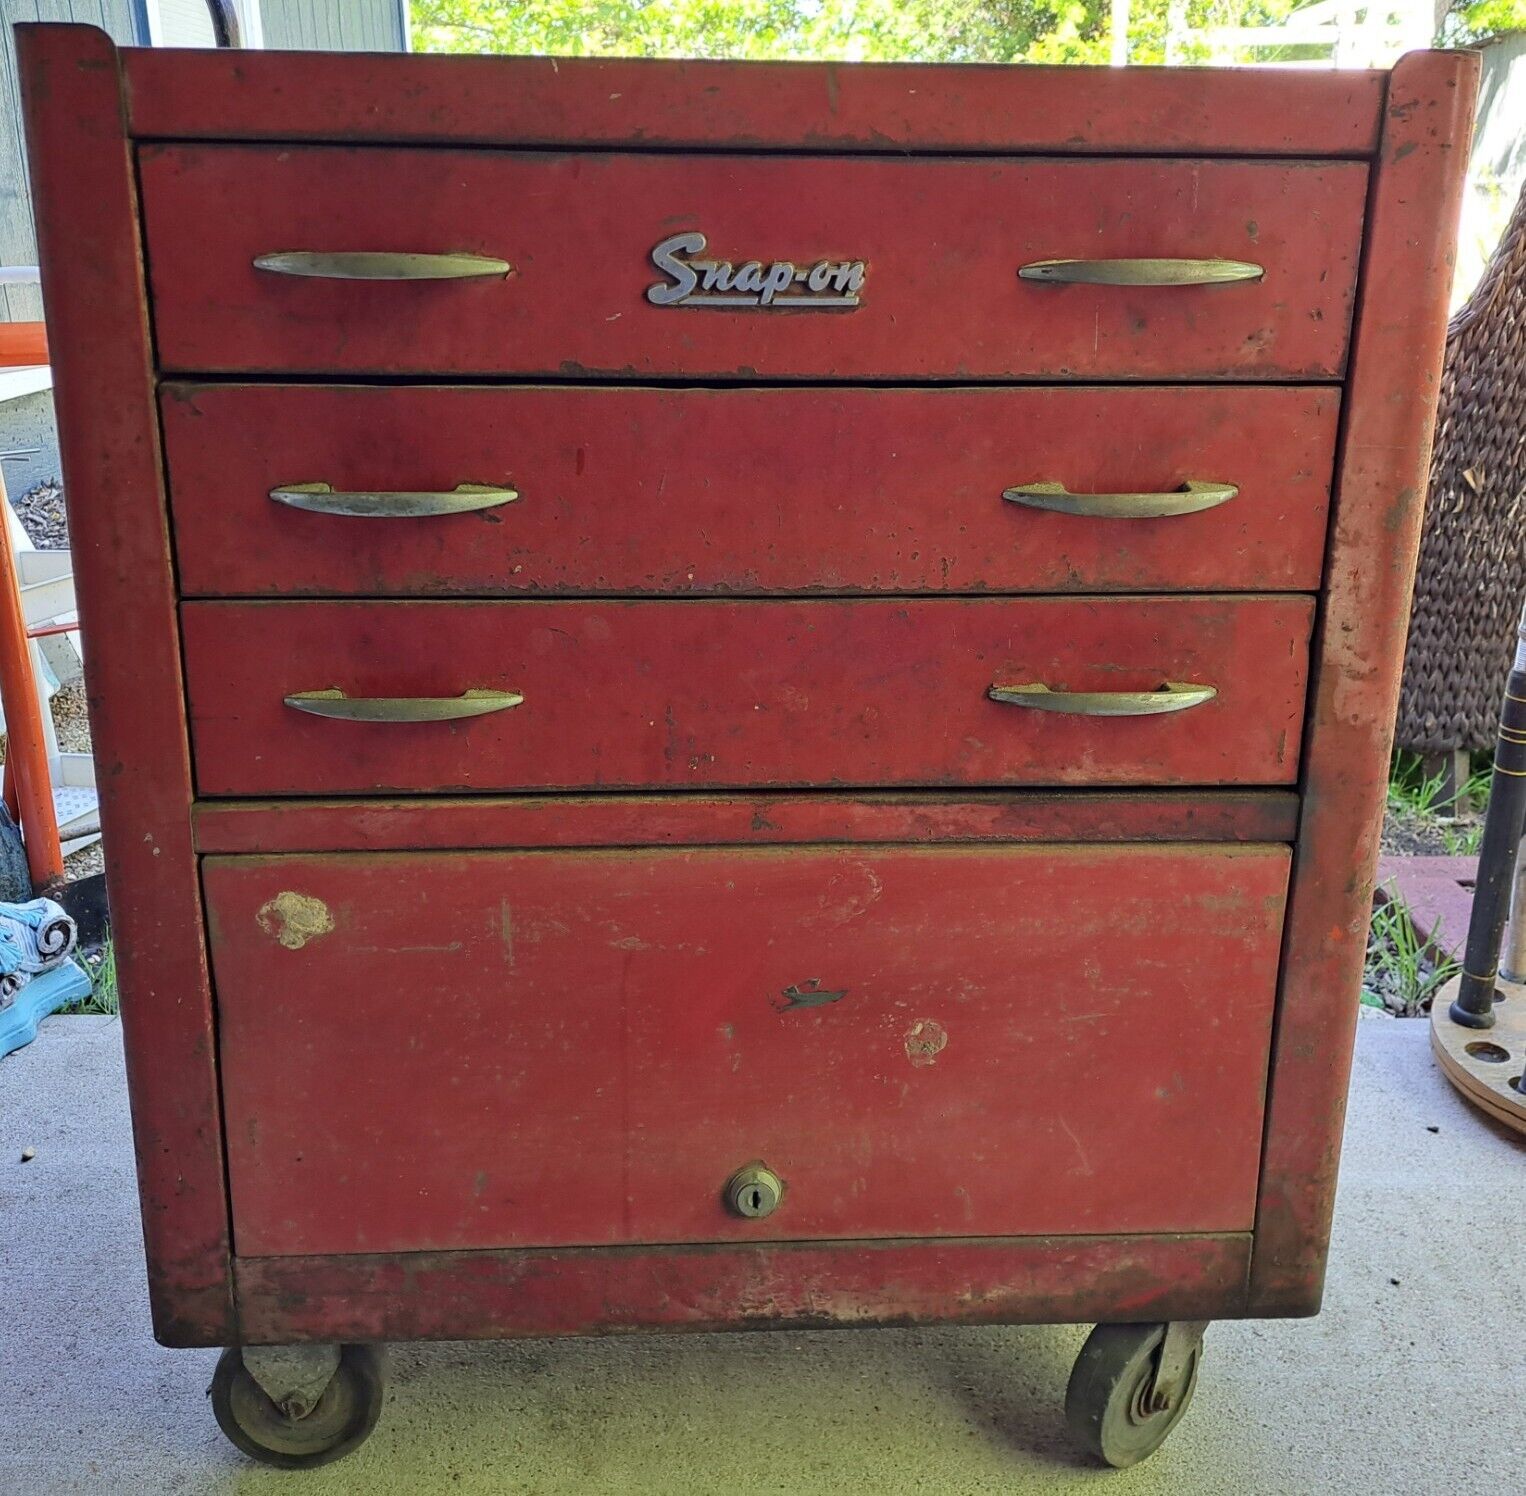 Vintage Snap On Roll Cart 3 Drawer Bottom Chest Tool Box Red 60's